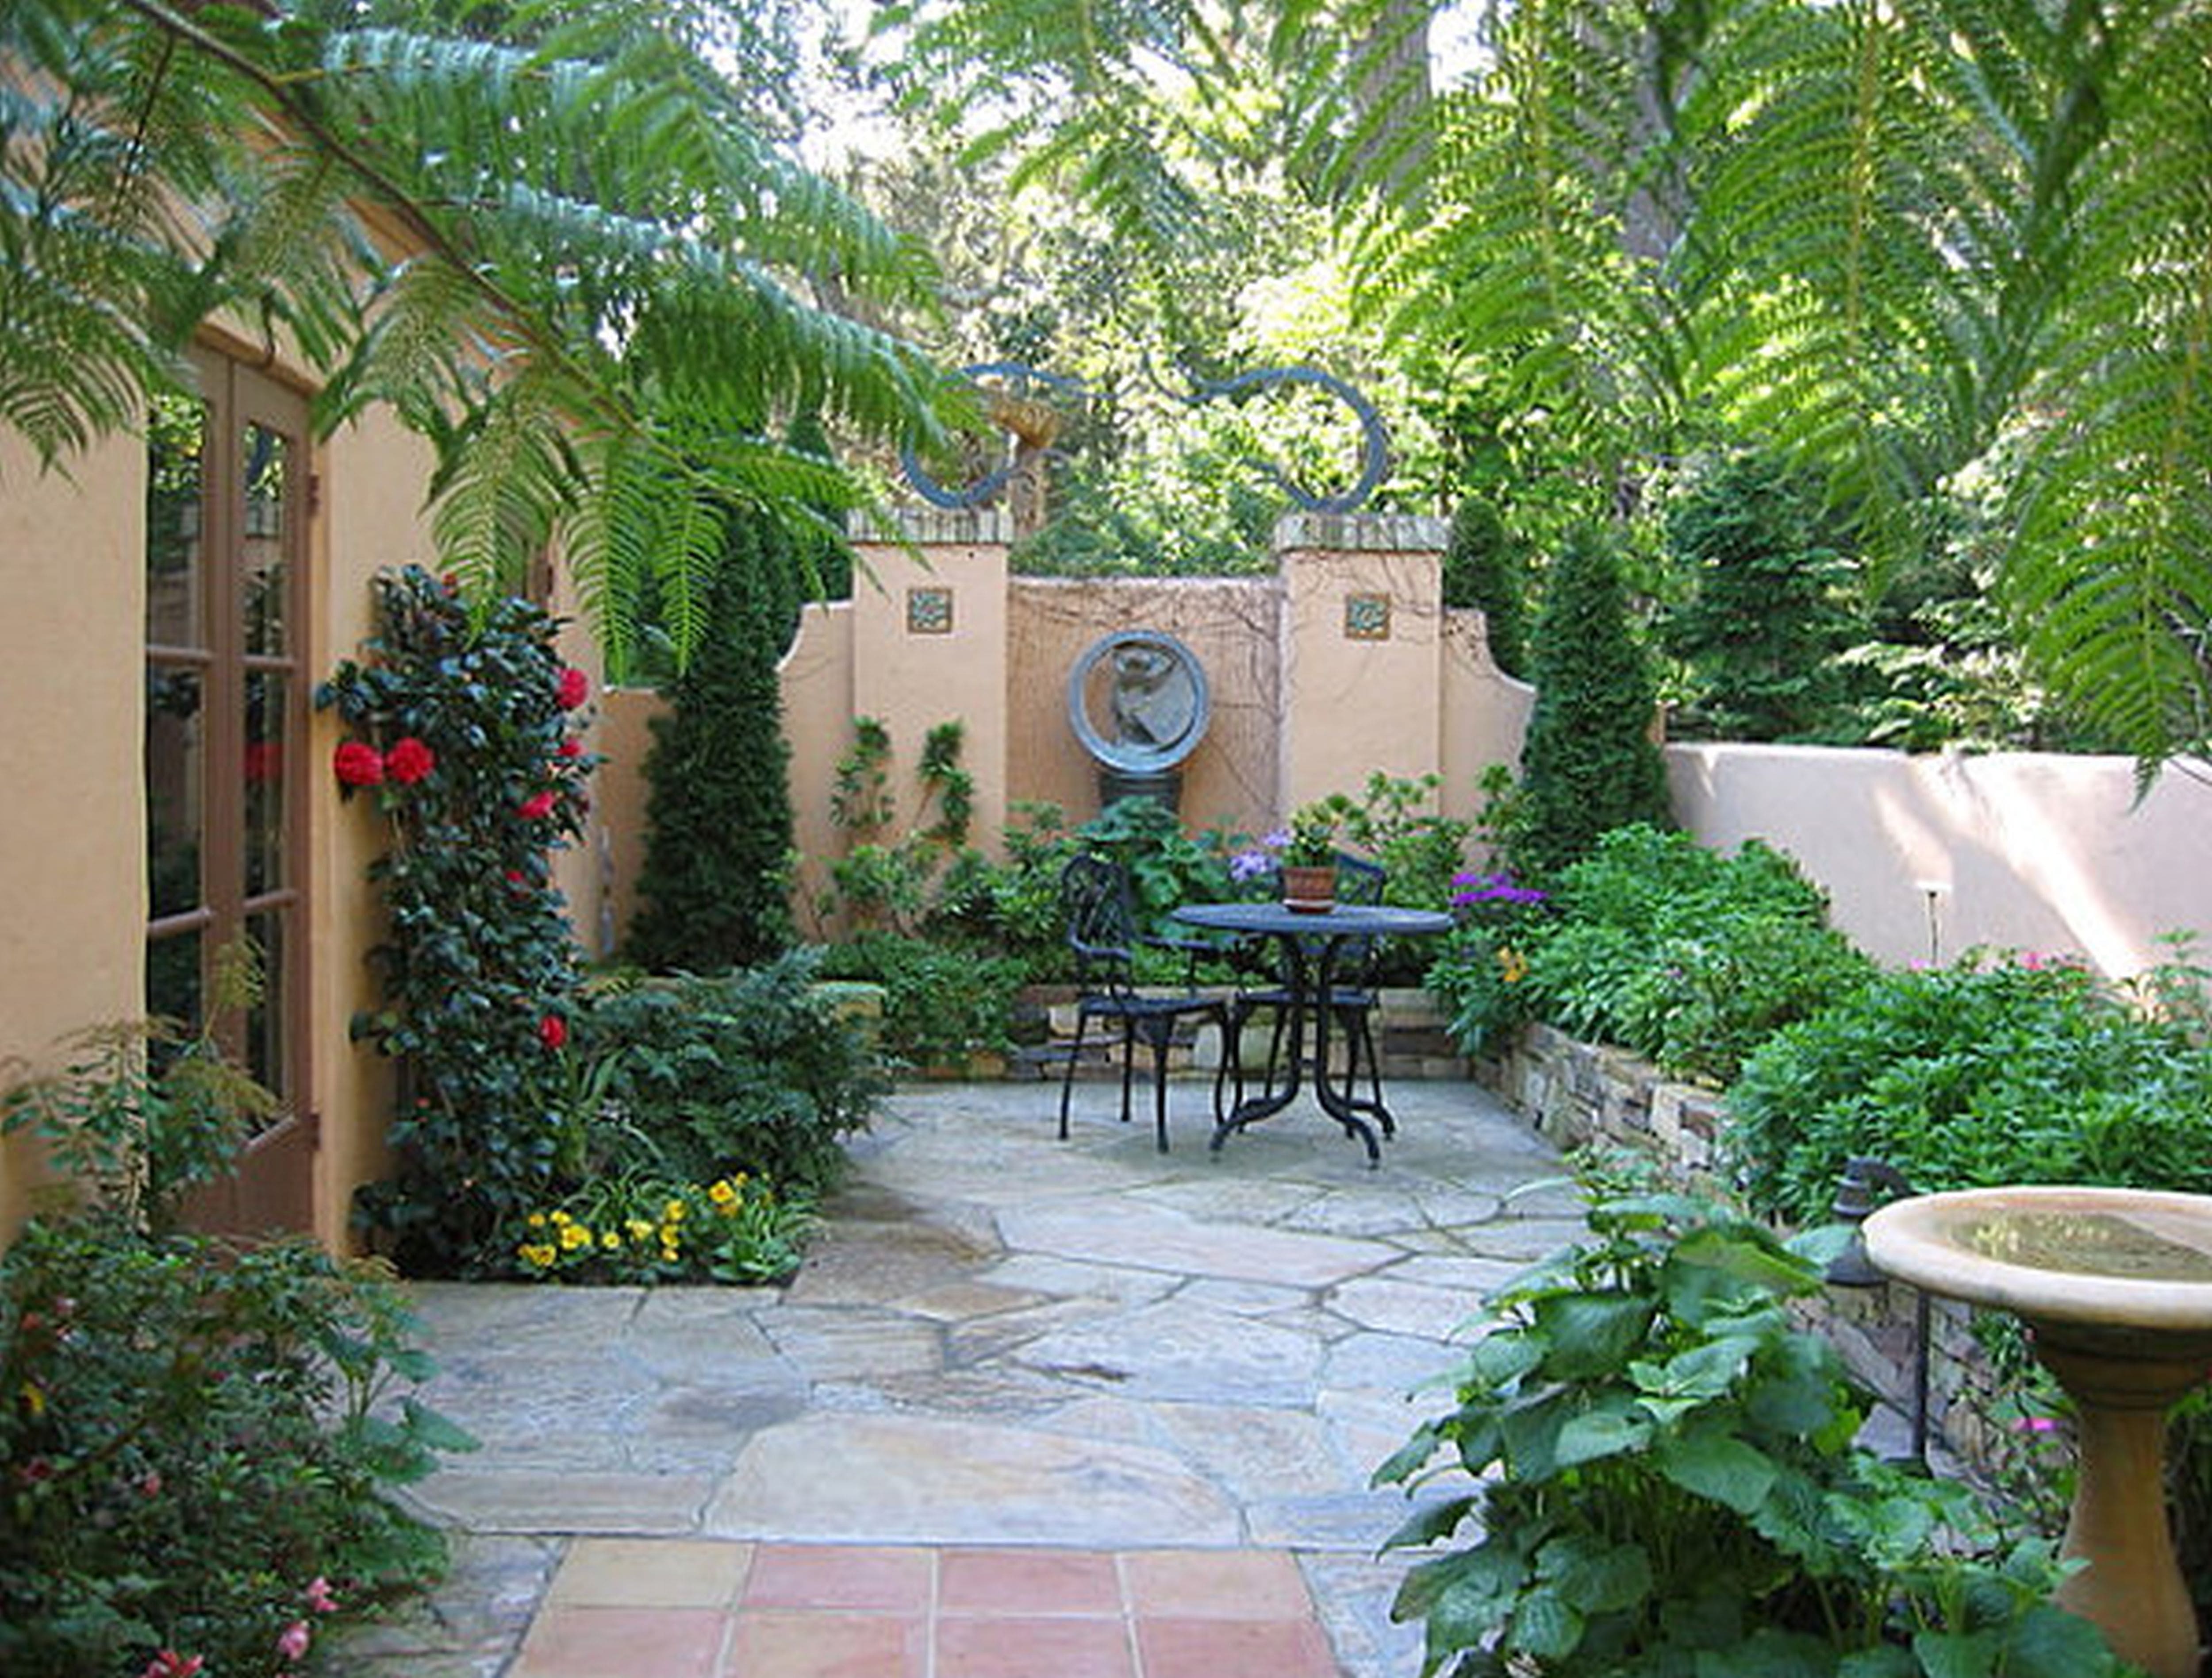 23.SIMPHOME.COM A tropical landscaping ideas for small yards southern homes